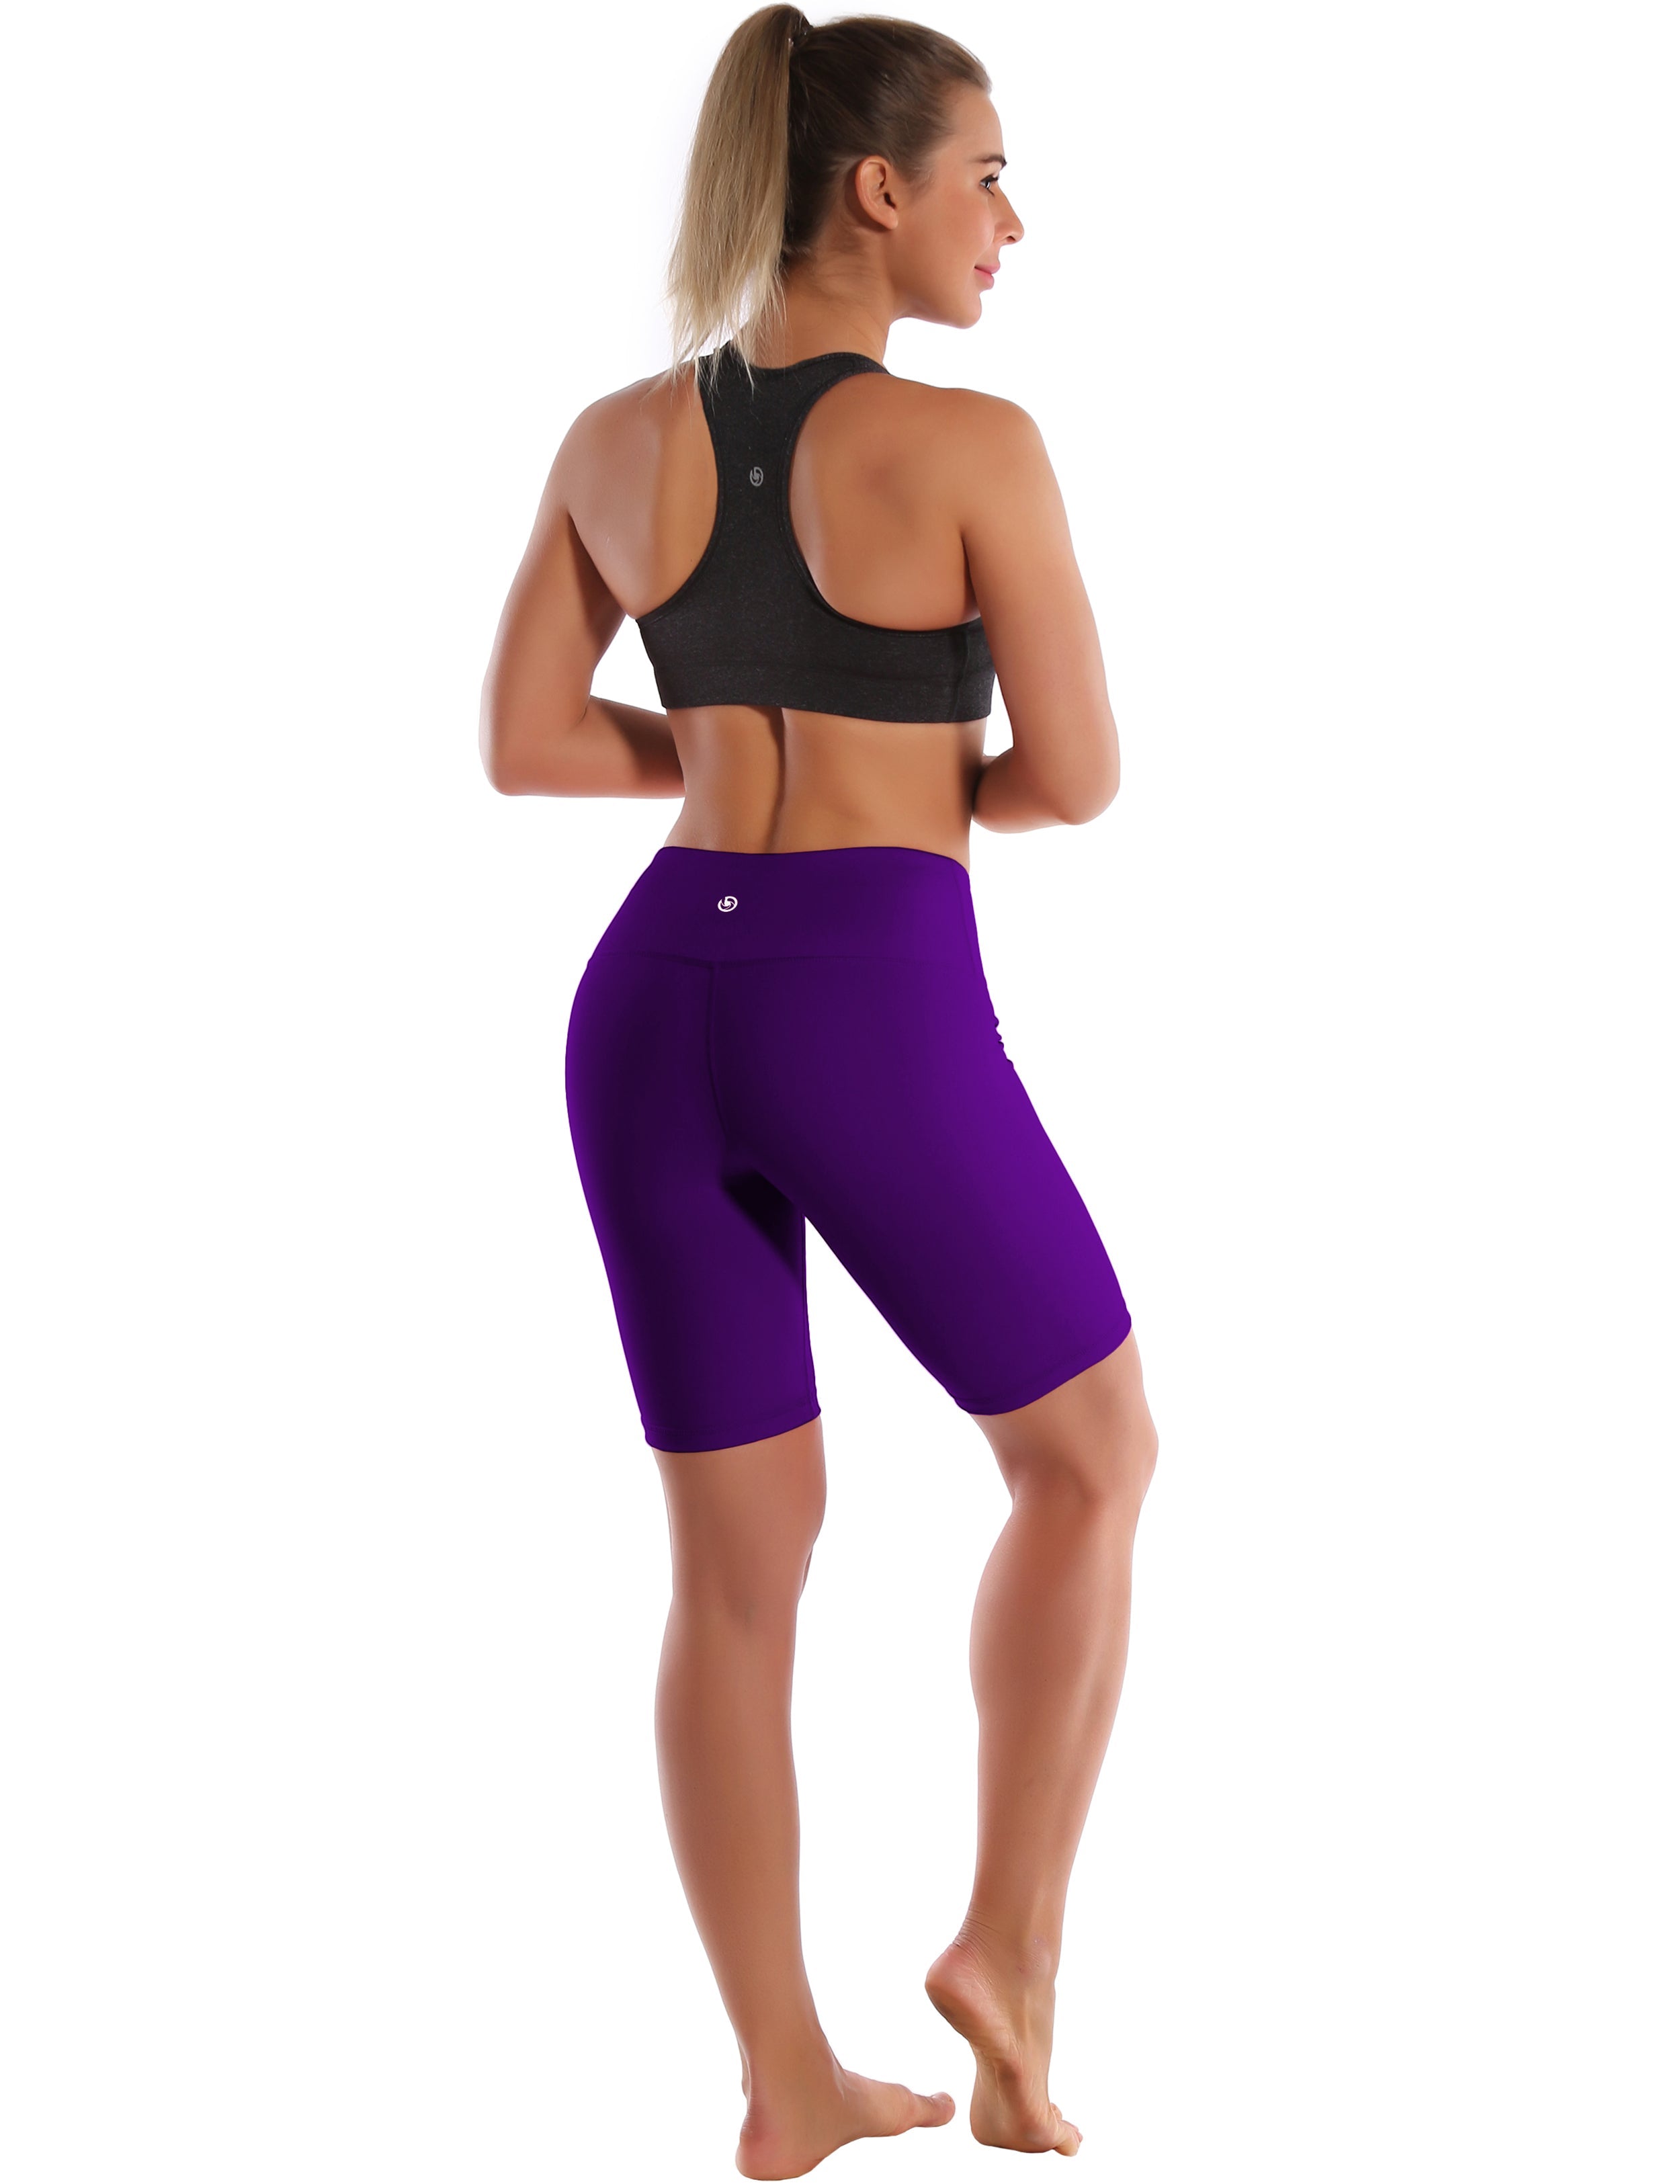 8" High Waist Pilates Shorts eggplantpurple Sleek, soft, smooth and totally comfortable: our newest style is here. Softest-ever fabric High elasticity High density 4-way stretch Fabric doesn't attract lint easily No see-through Moisture-wicking Machine wash 75% Nylon, 25% Spandex